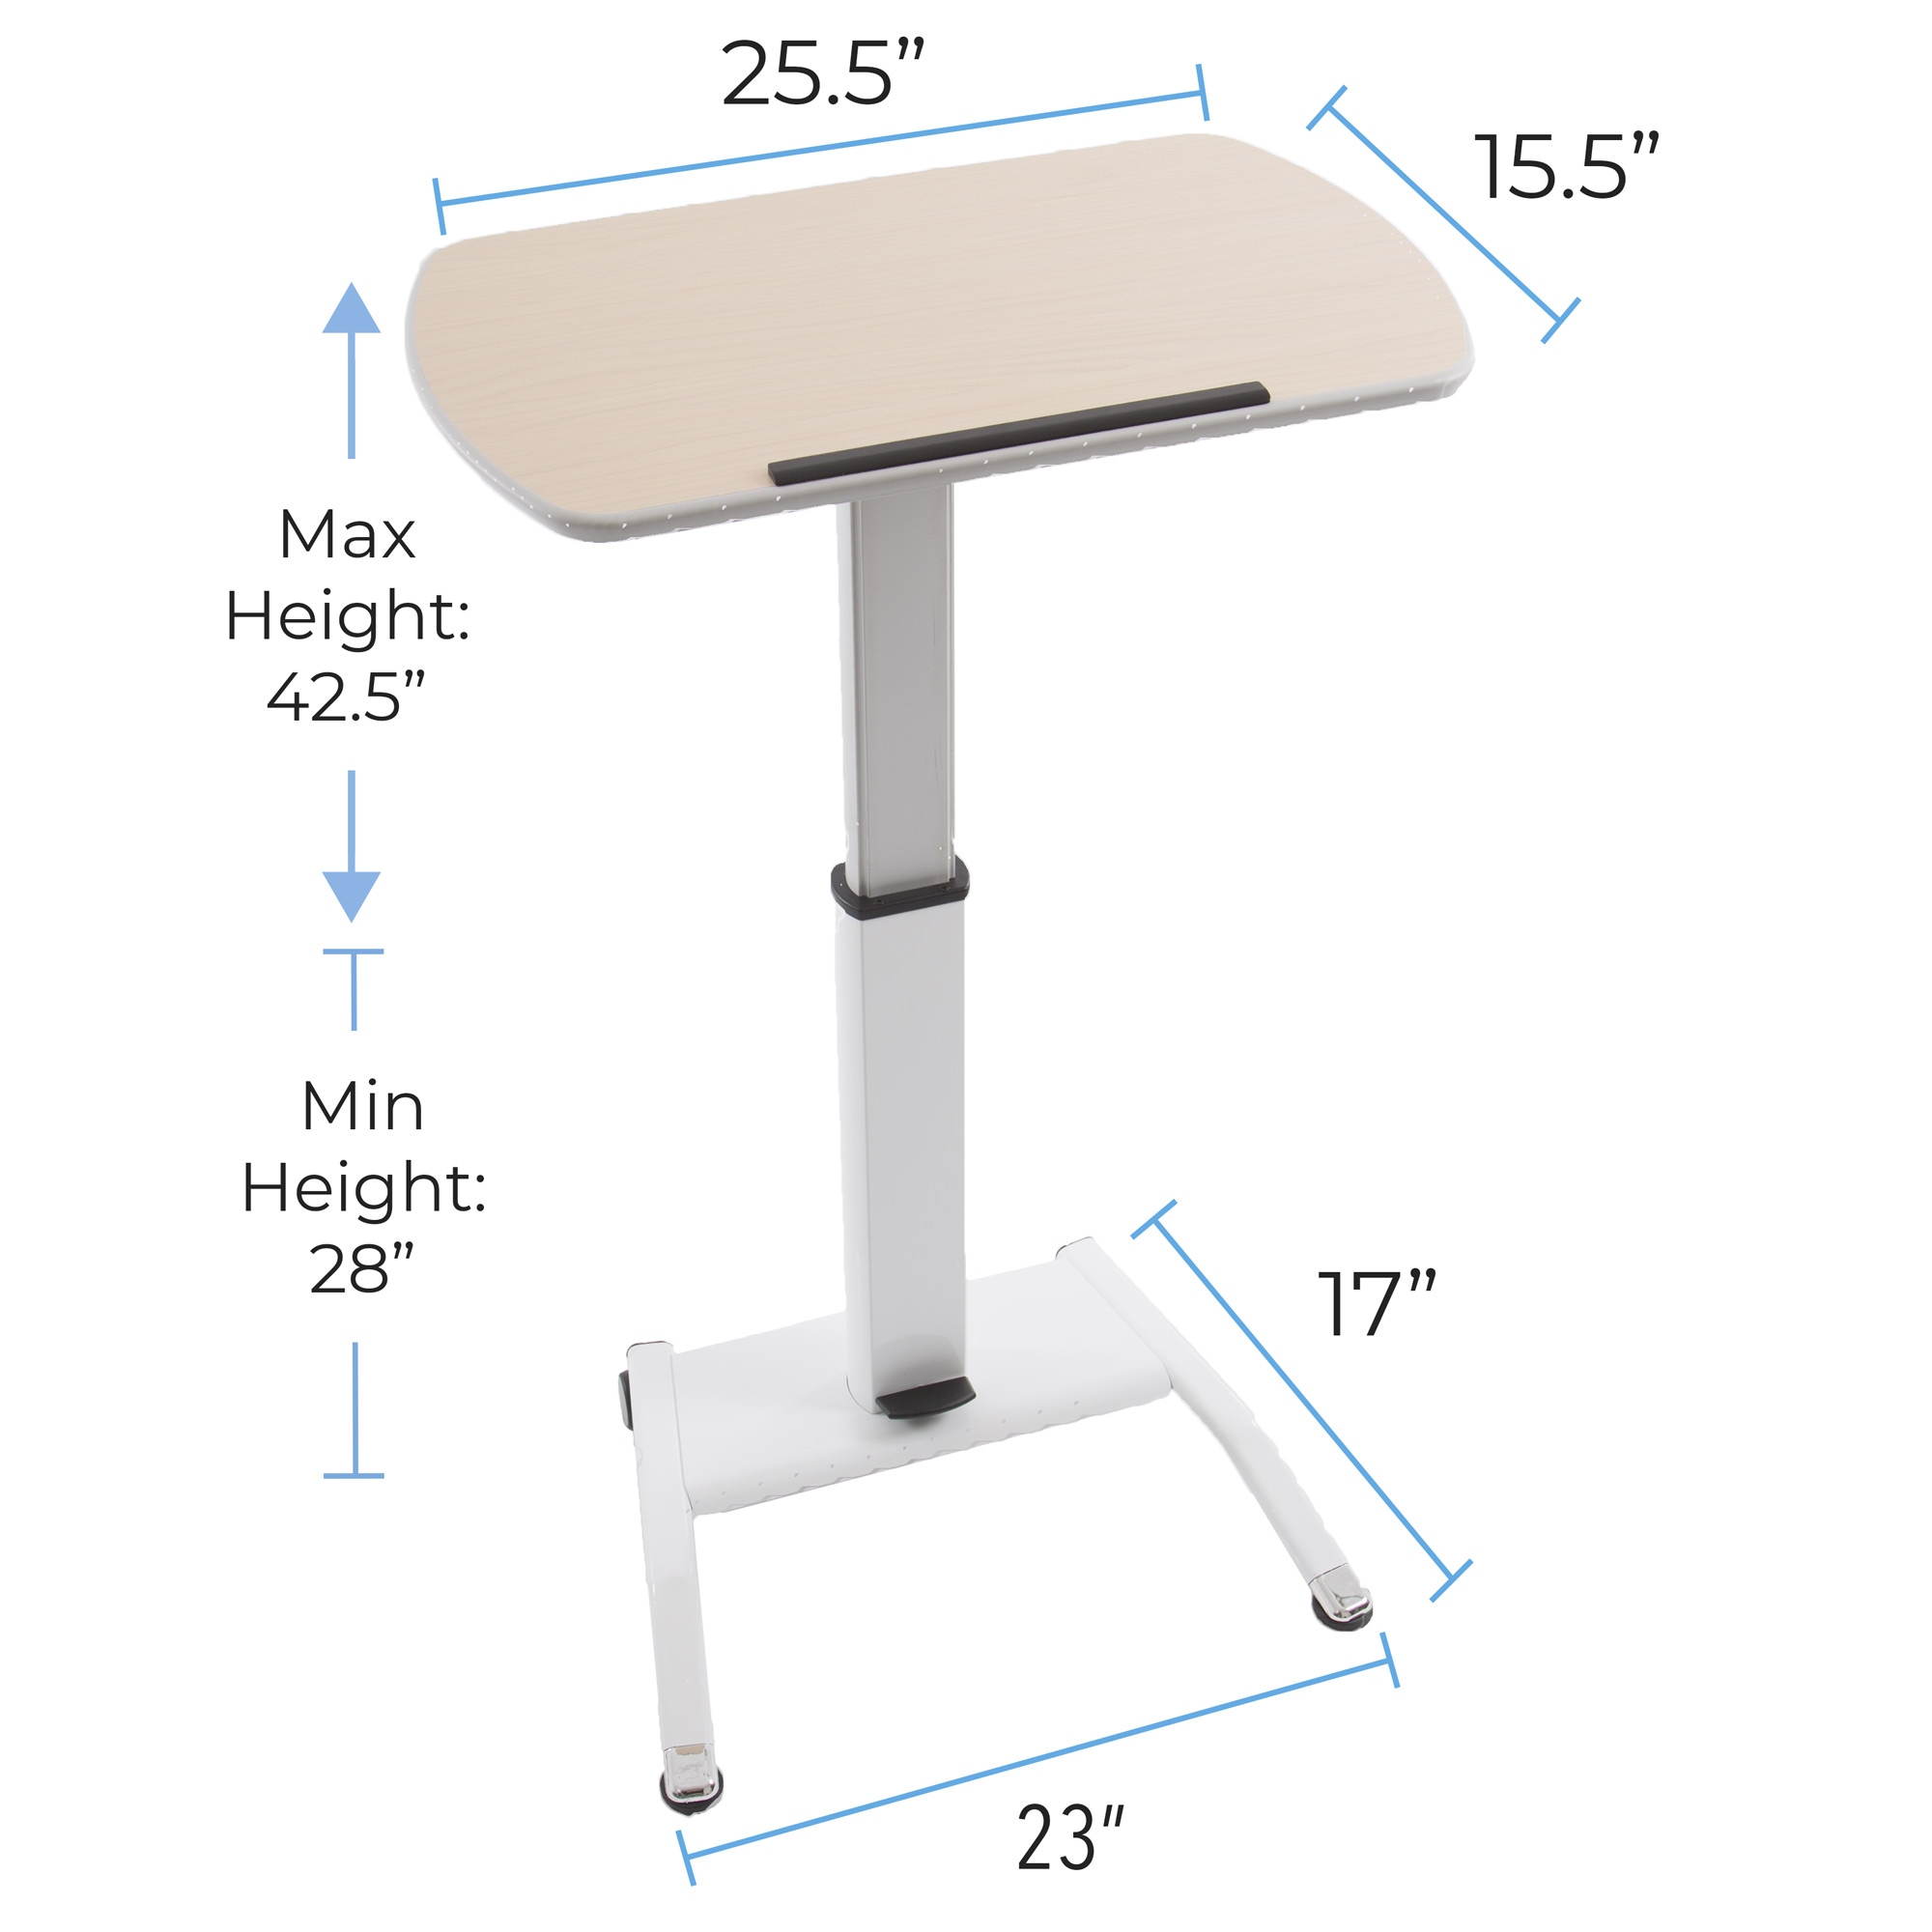 Stand Steady Multifunctional Podium | Lectern | Laptop Stand | Mobile Workstation! Excellent Use for Classrooms, Offices, and H